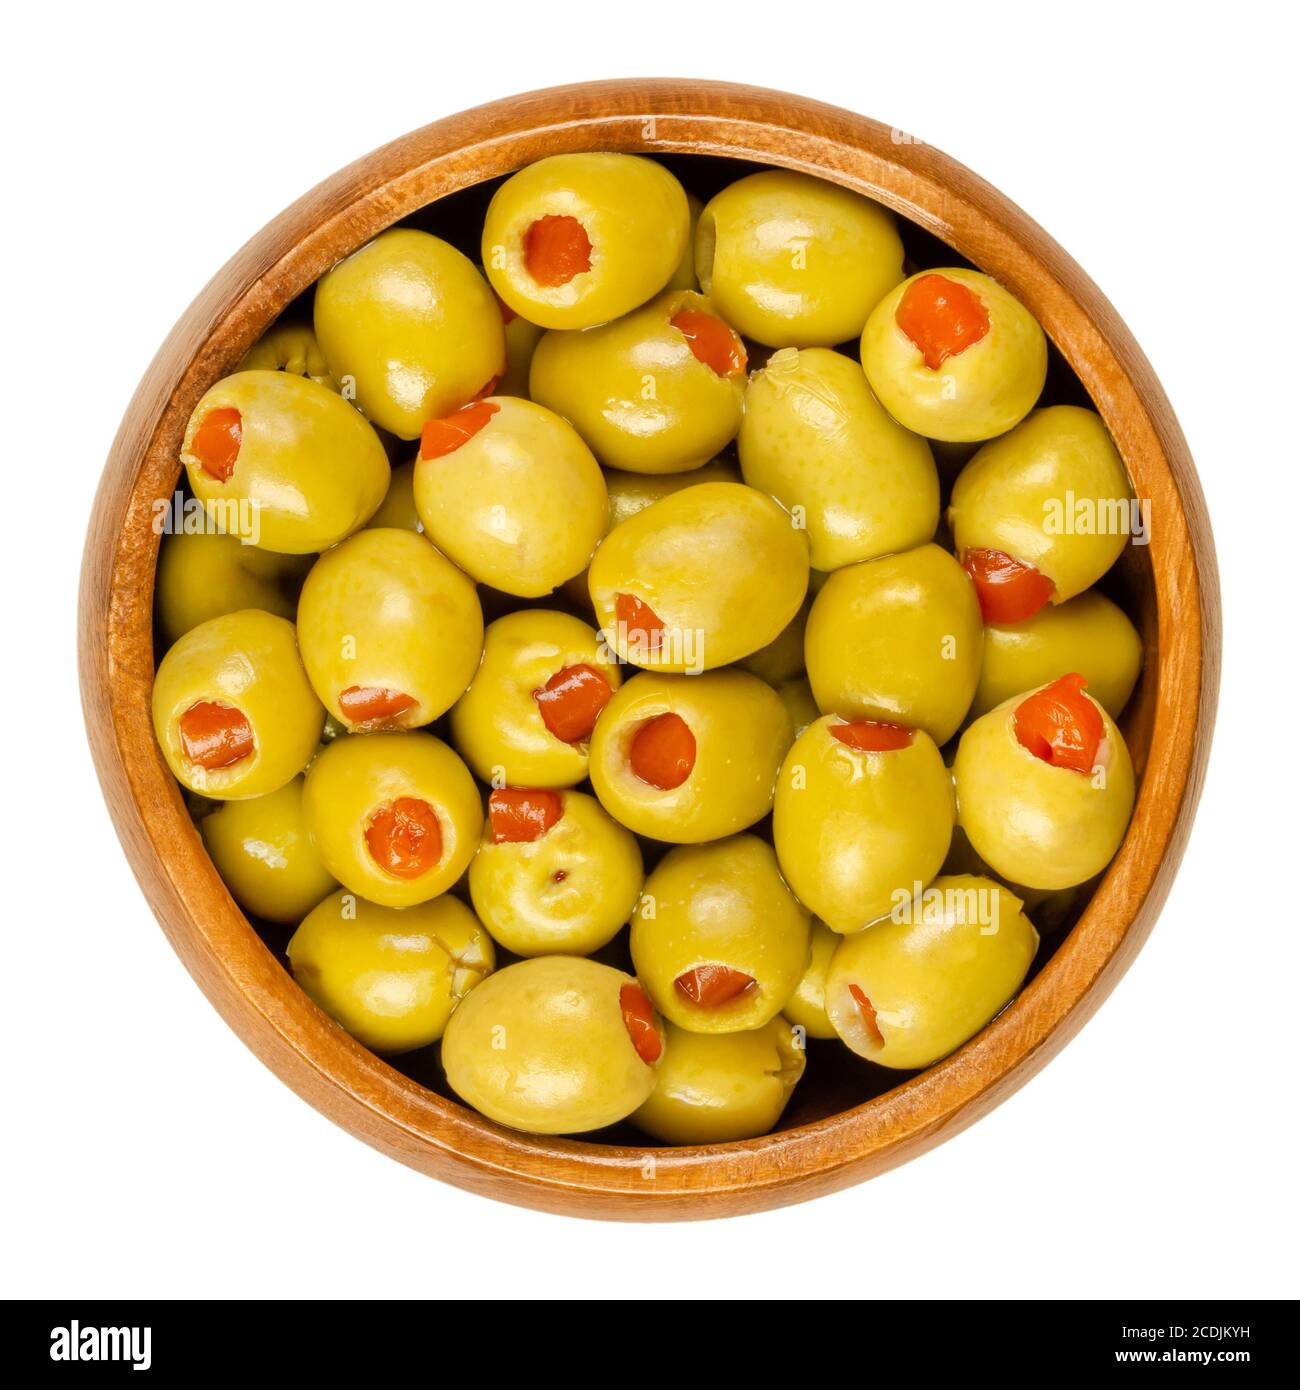 Pickled small green olives, filled with red sweet pepper in a wooden bowl. Fruits of Olea europaea, stuffed with bell pepper slices. Closeup. Stock Photo